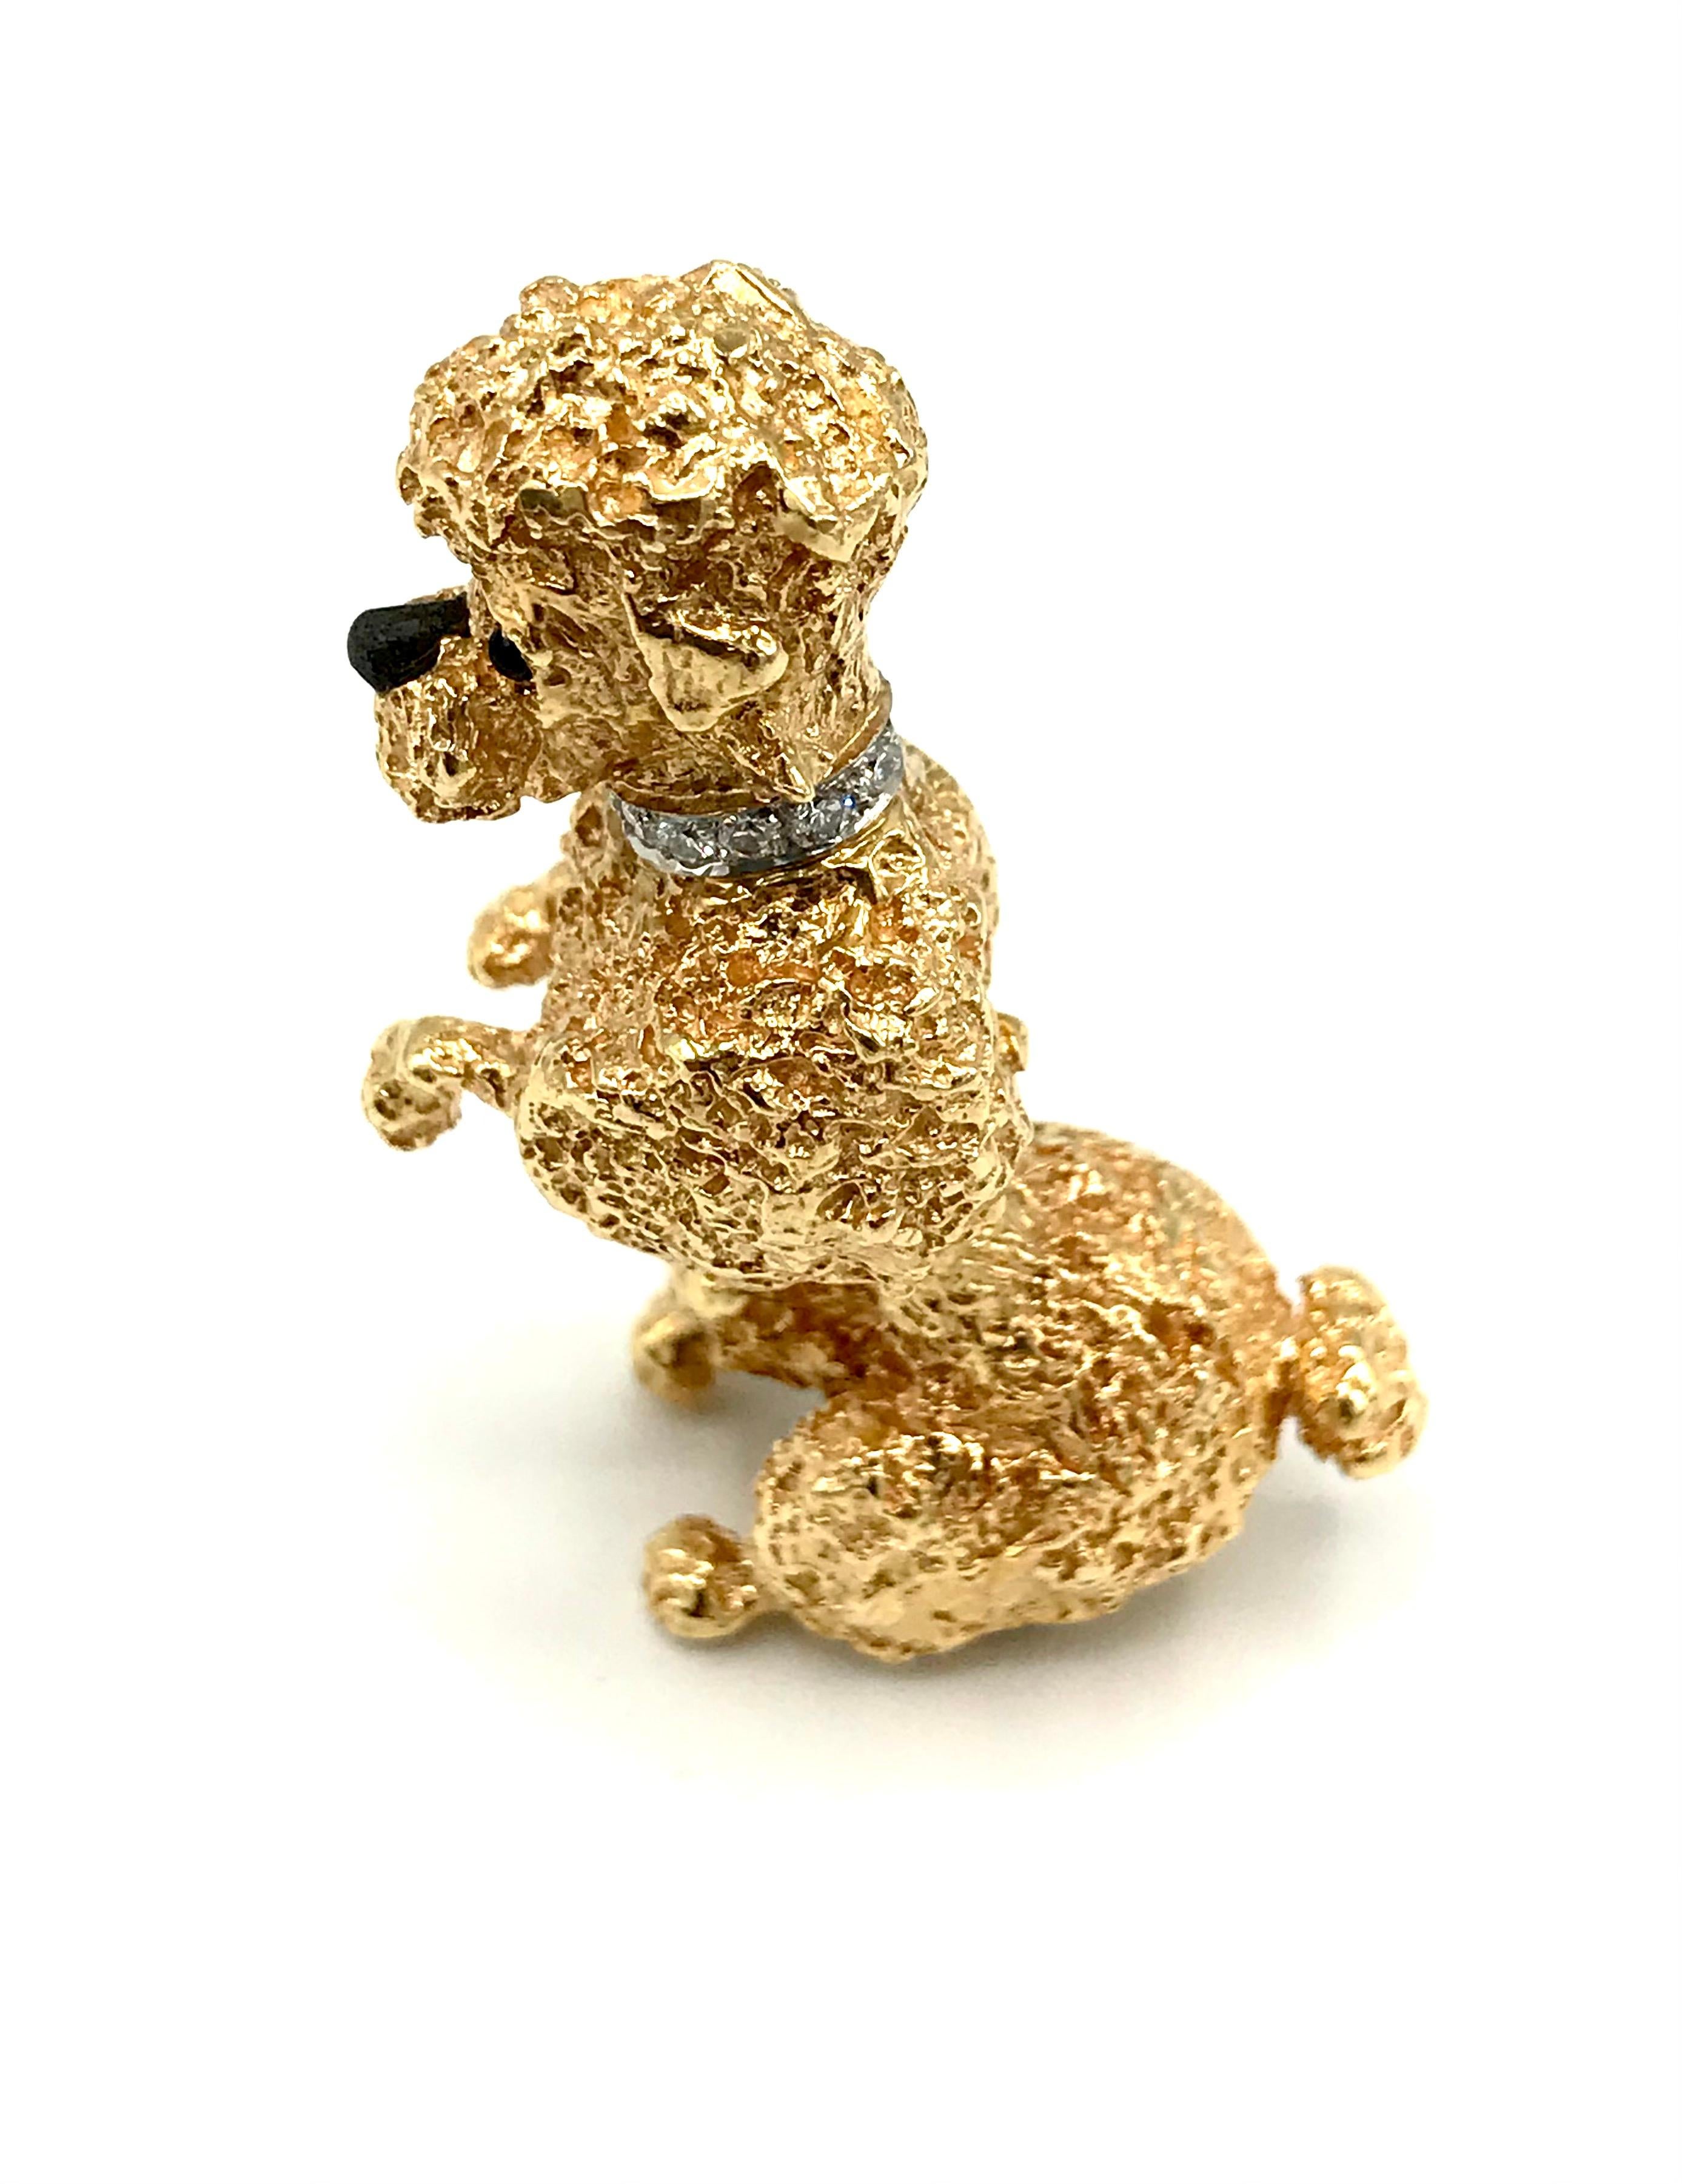 A skillfully crafted vintage Poodle brooch by William Ruser. Features a diamond set collar and onyx eyes. The collar is rhodium plated. Diamonds are round brilliant cut, total carat weight is approximately 0.3 points.  
Stamped with the Ruser